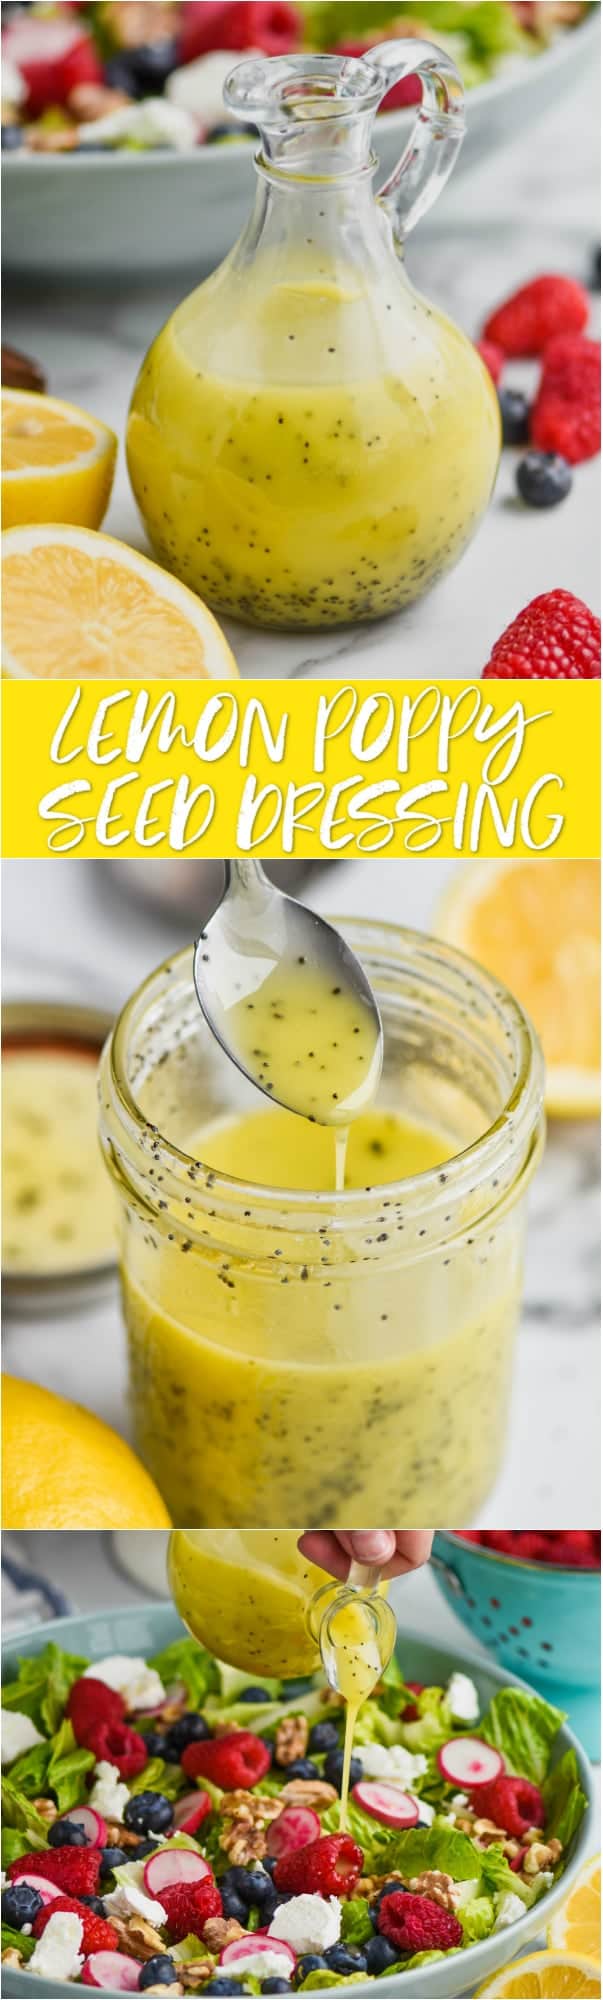 collage of photos of lemon poppy seed dressing